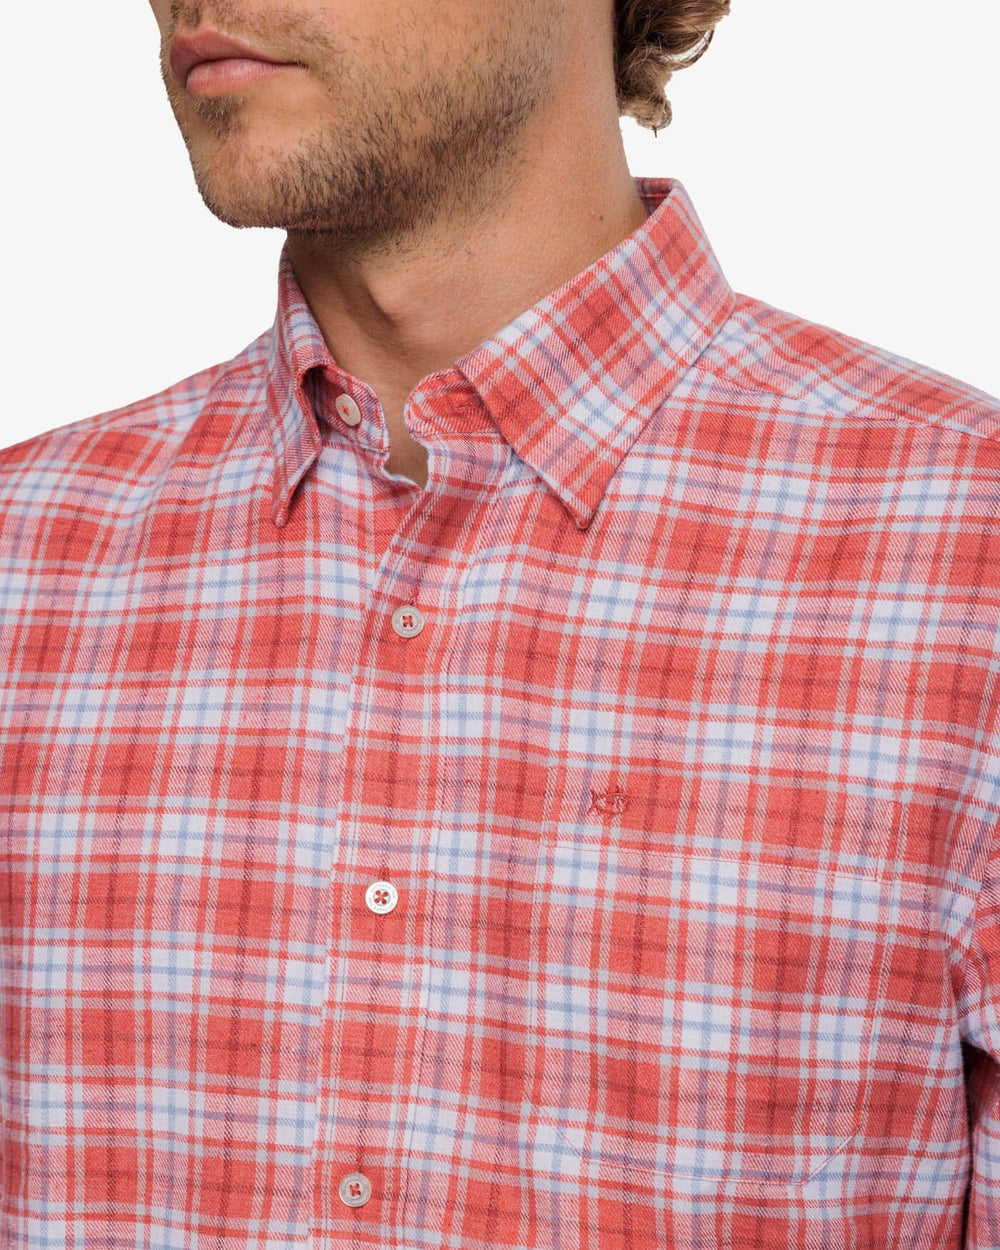 The detail view of the Southern Tide Beach Flannel Heather Howland Plaid Sport Shirt by Southern Tide - Heather Dusty Coral